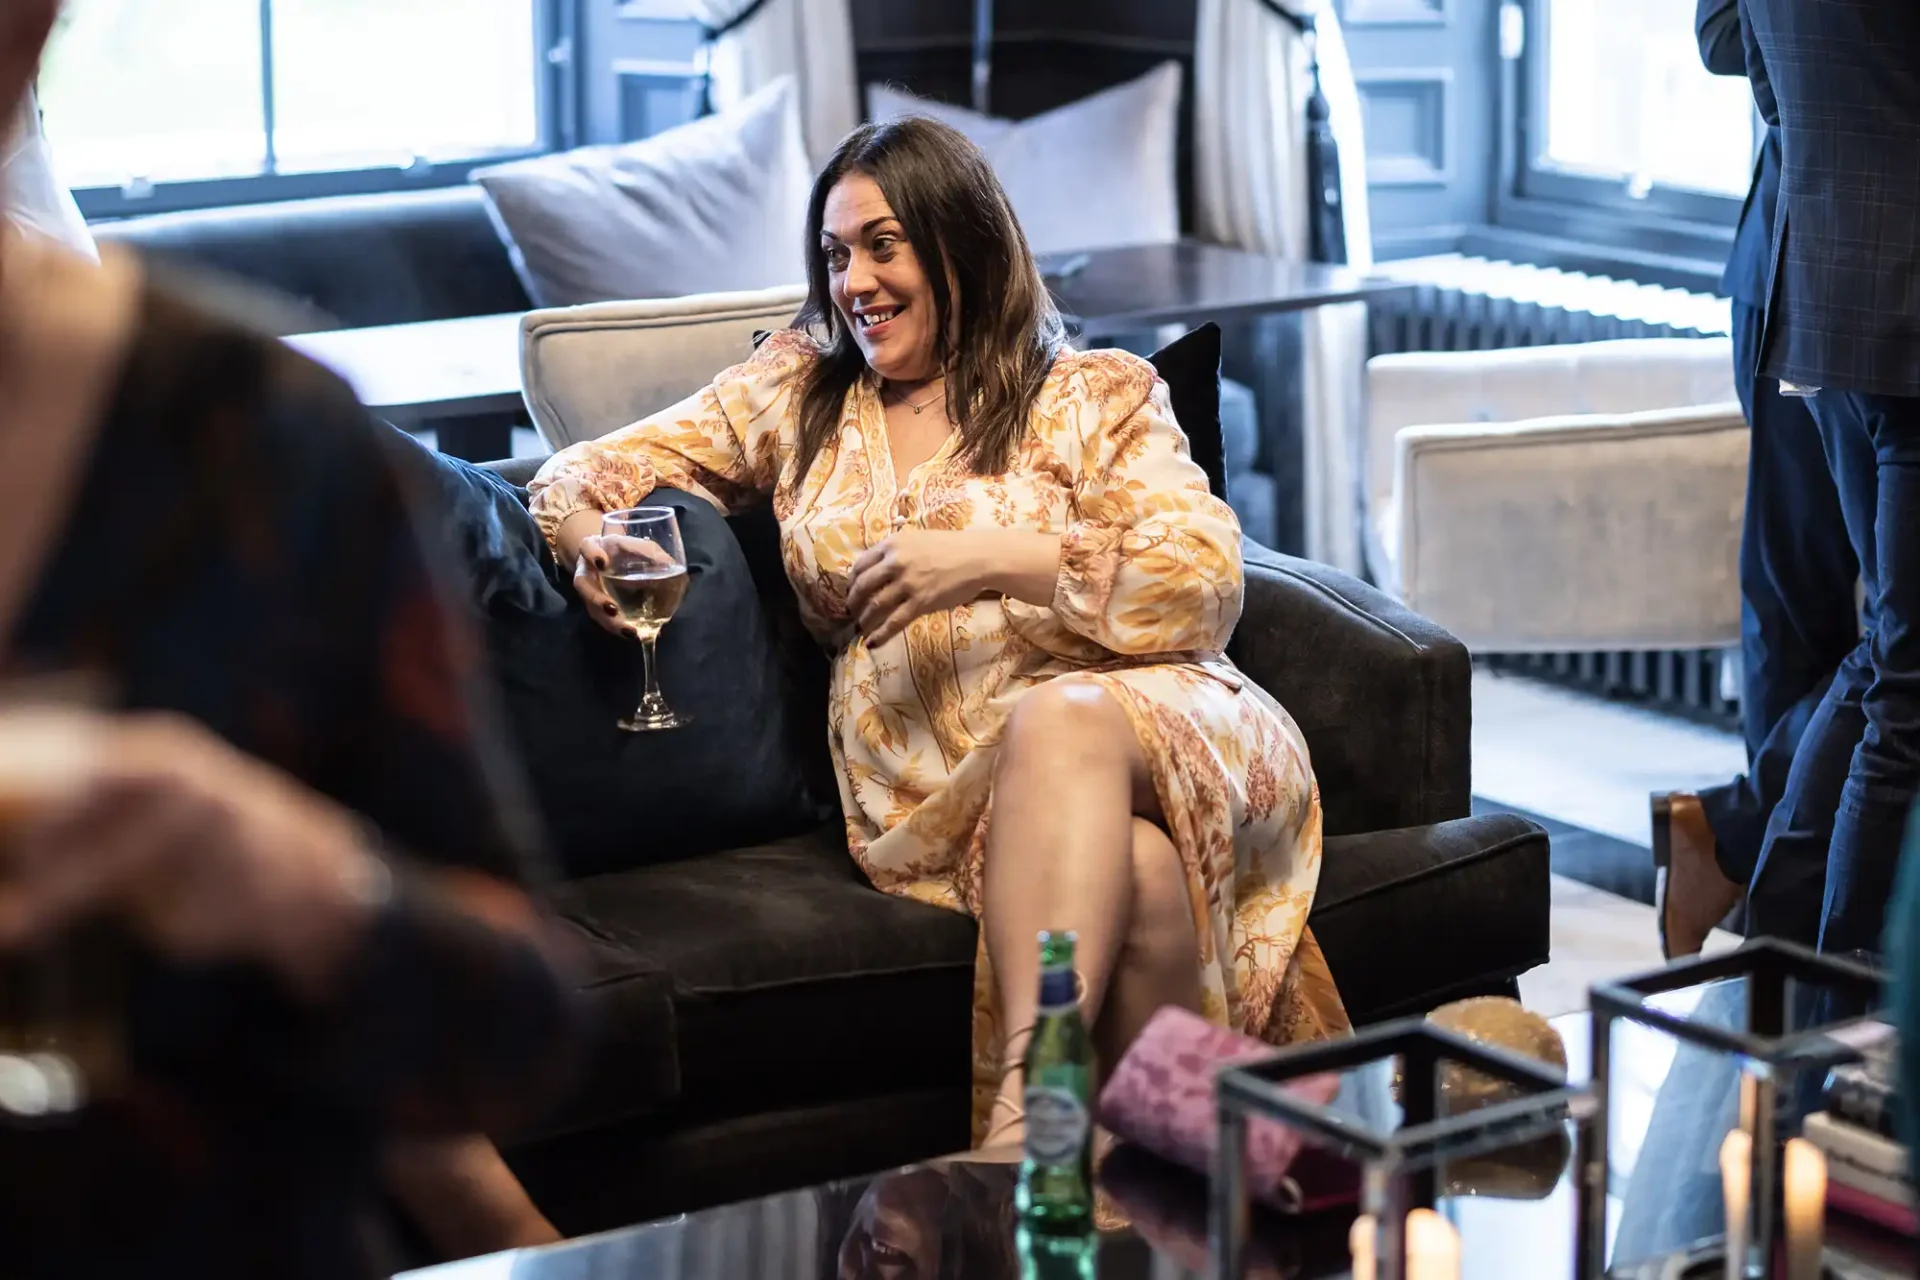 A woman in a floral dress, laughing and holding a wine glass, sits on a black sofa in a stylish lounge.